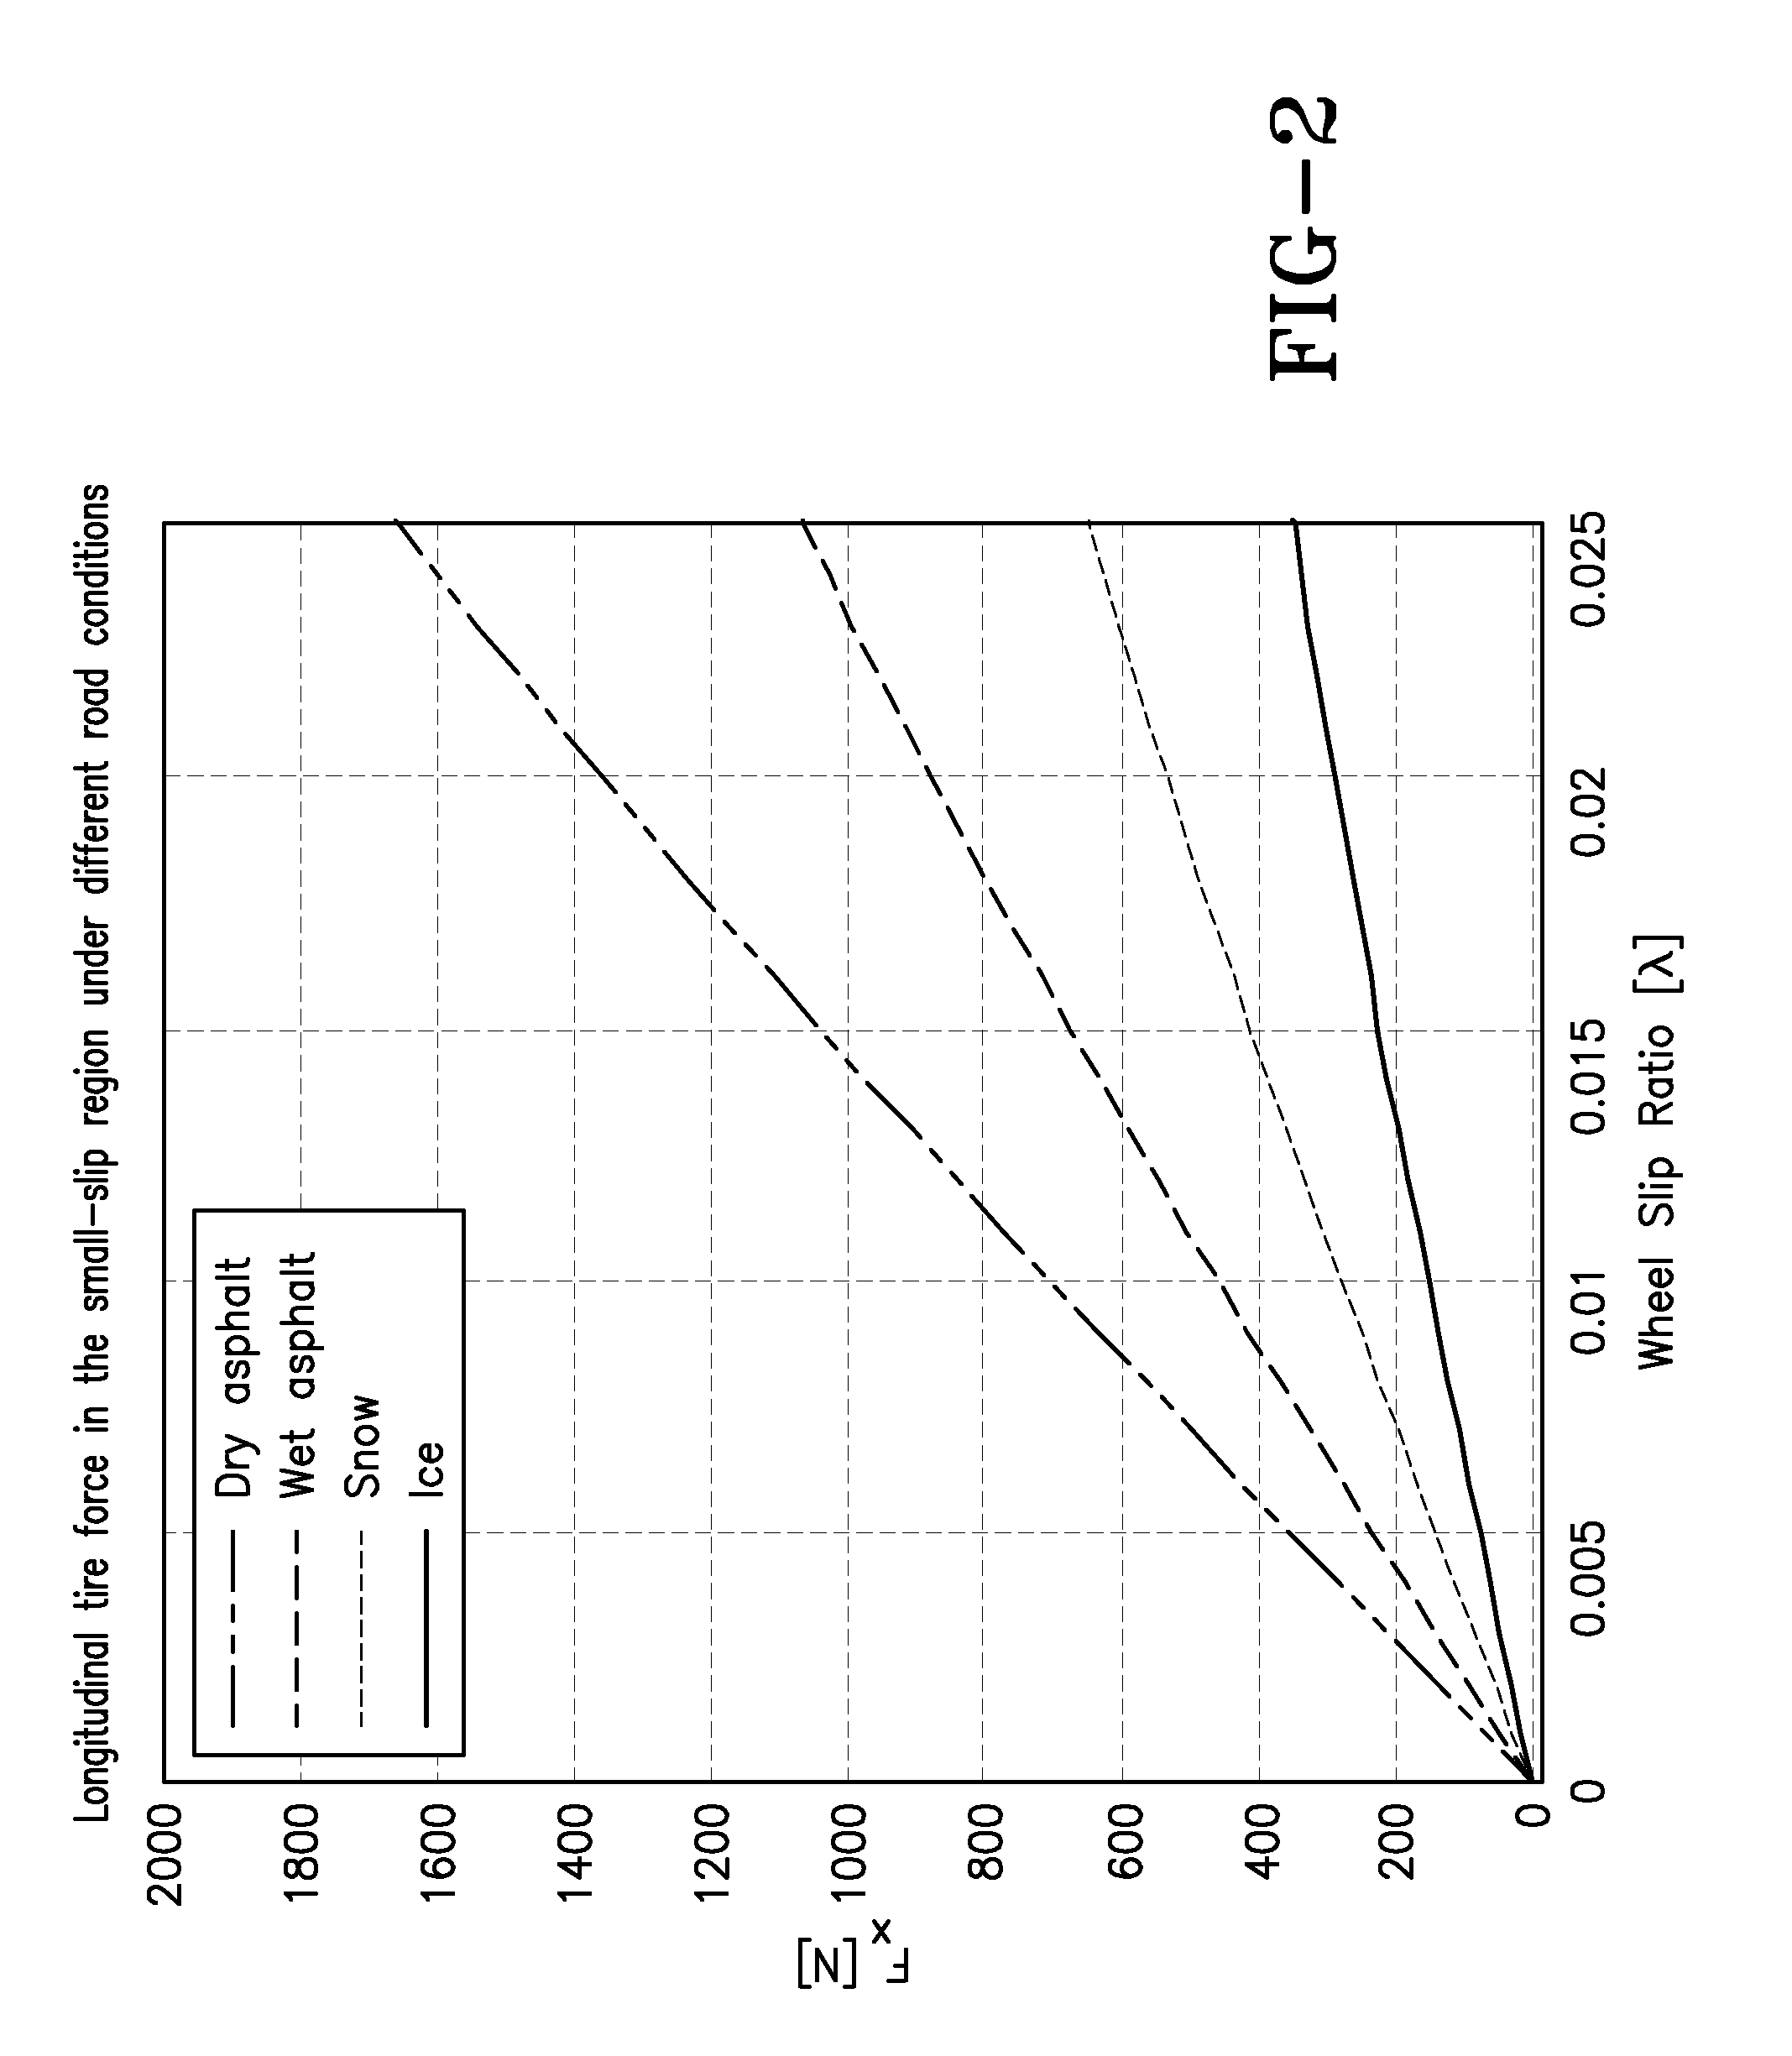 Road surface friction and surface type estimation system and method